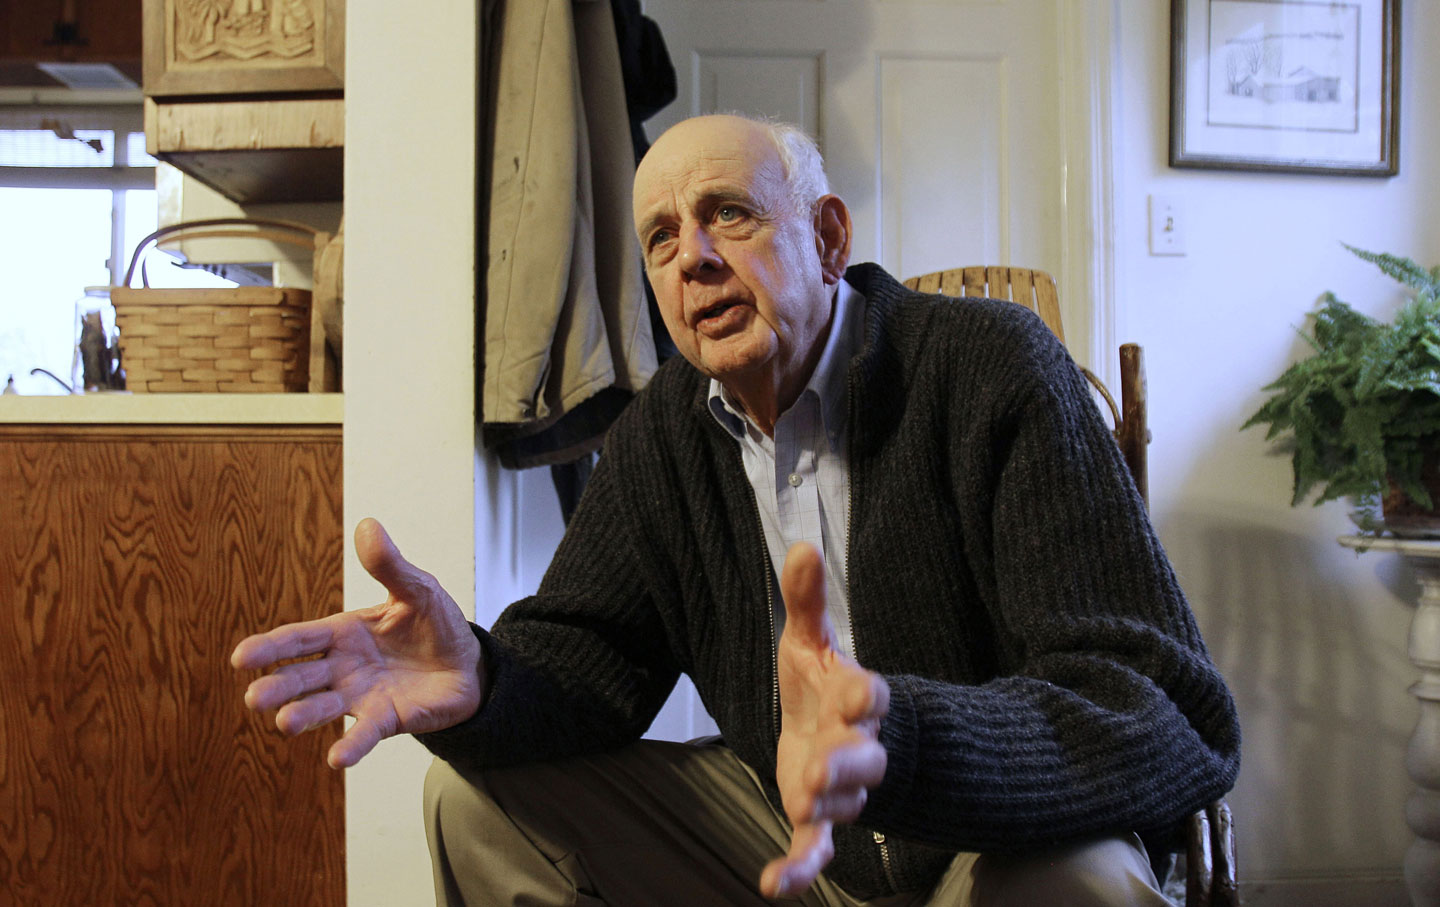 The Gospel According to Wendell Berry